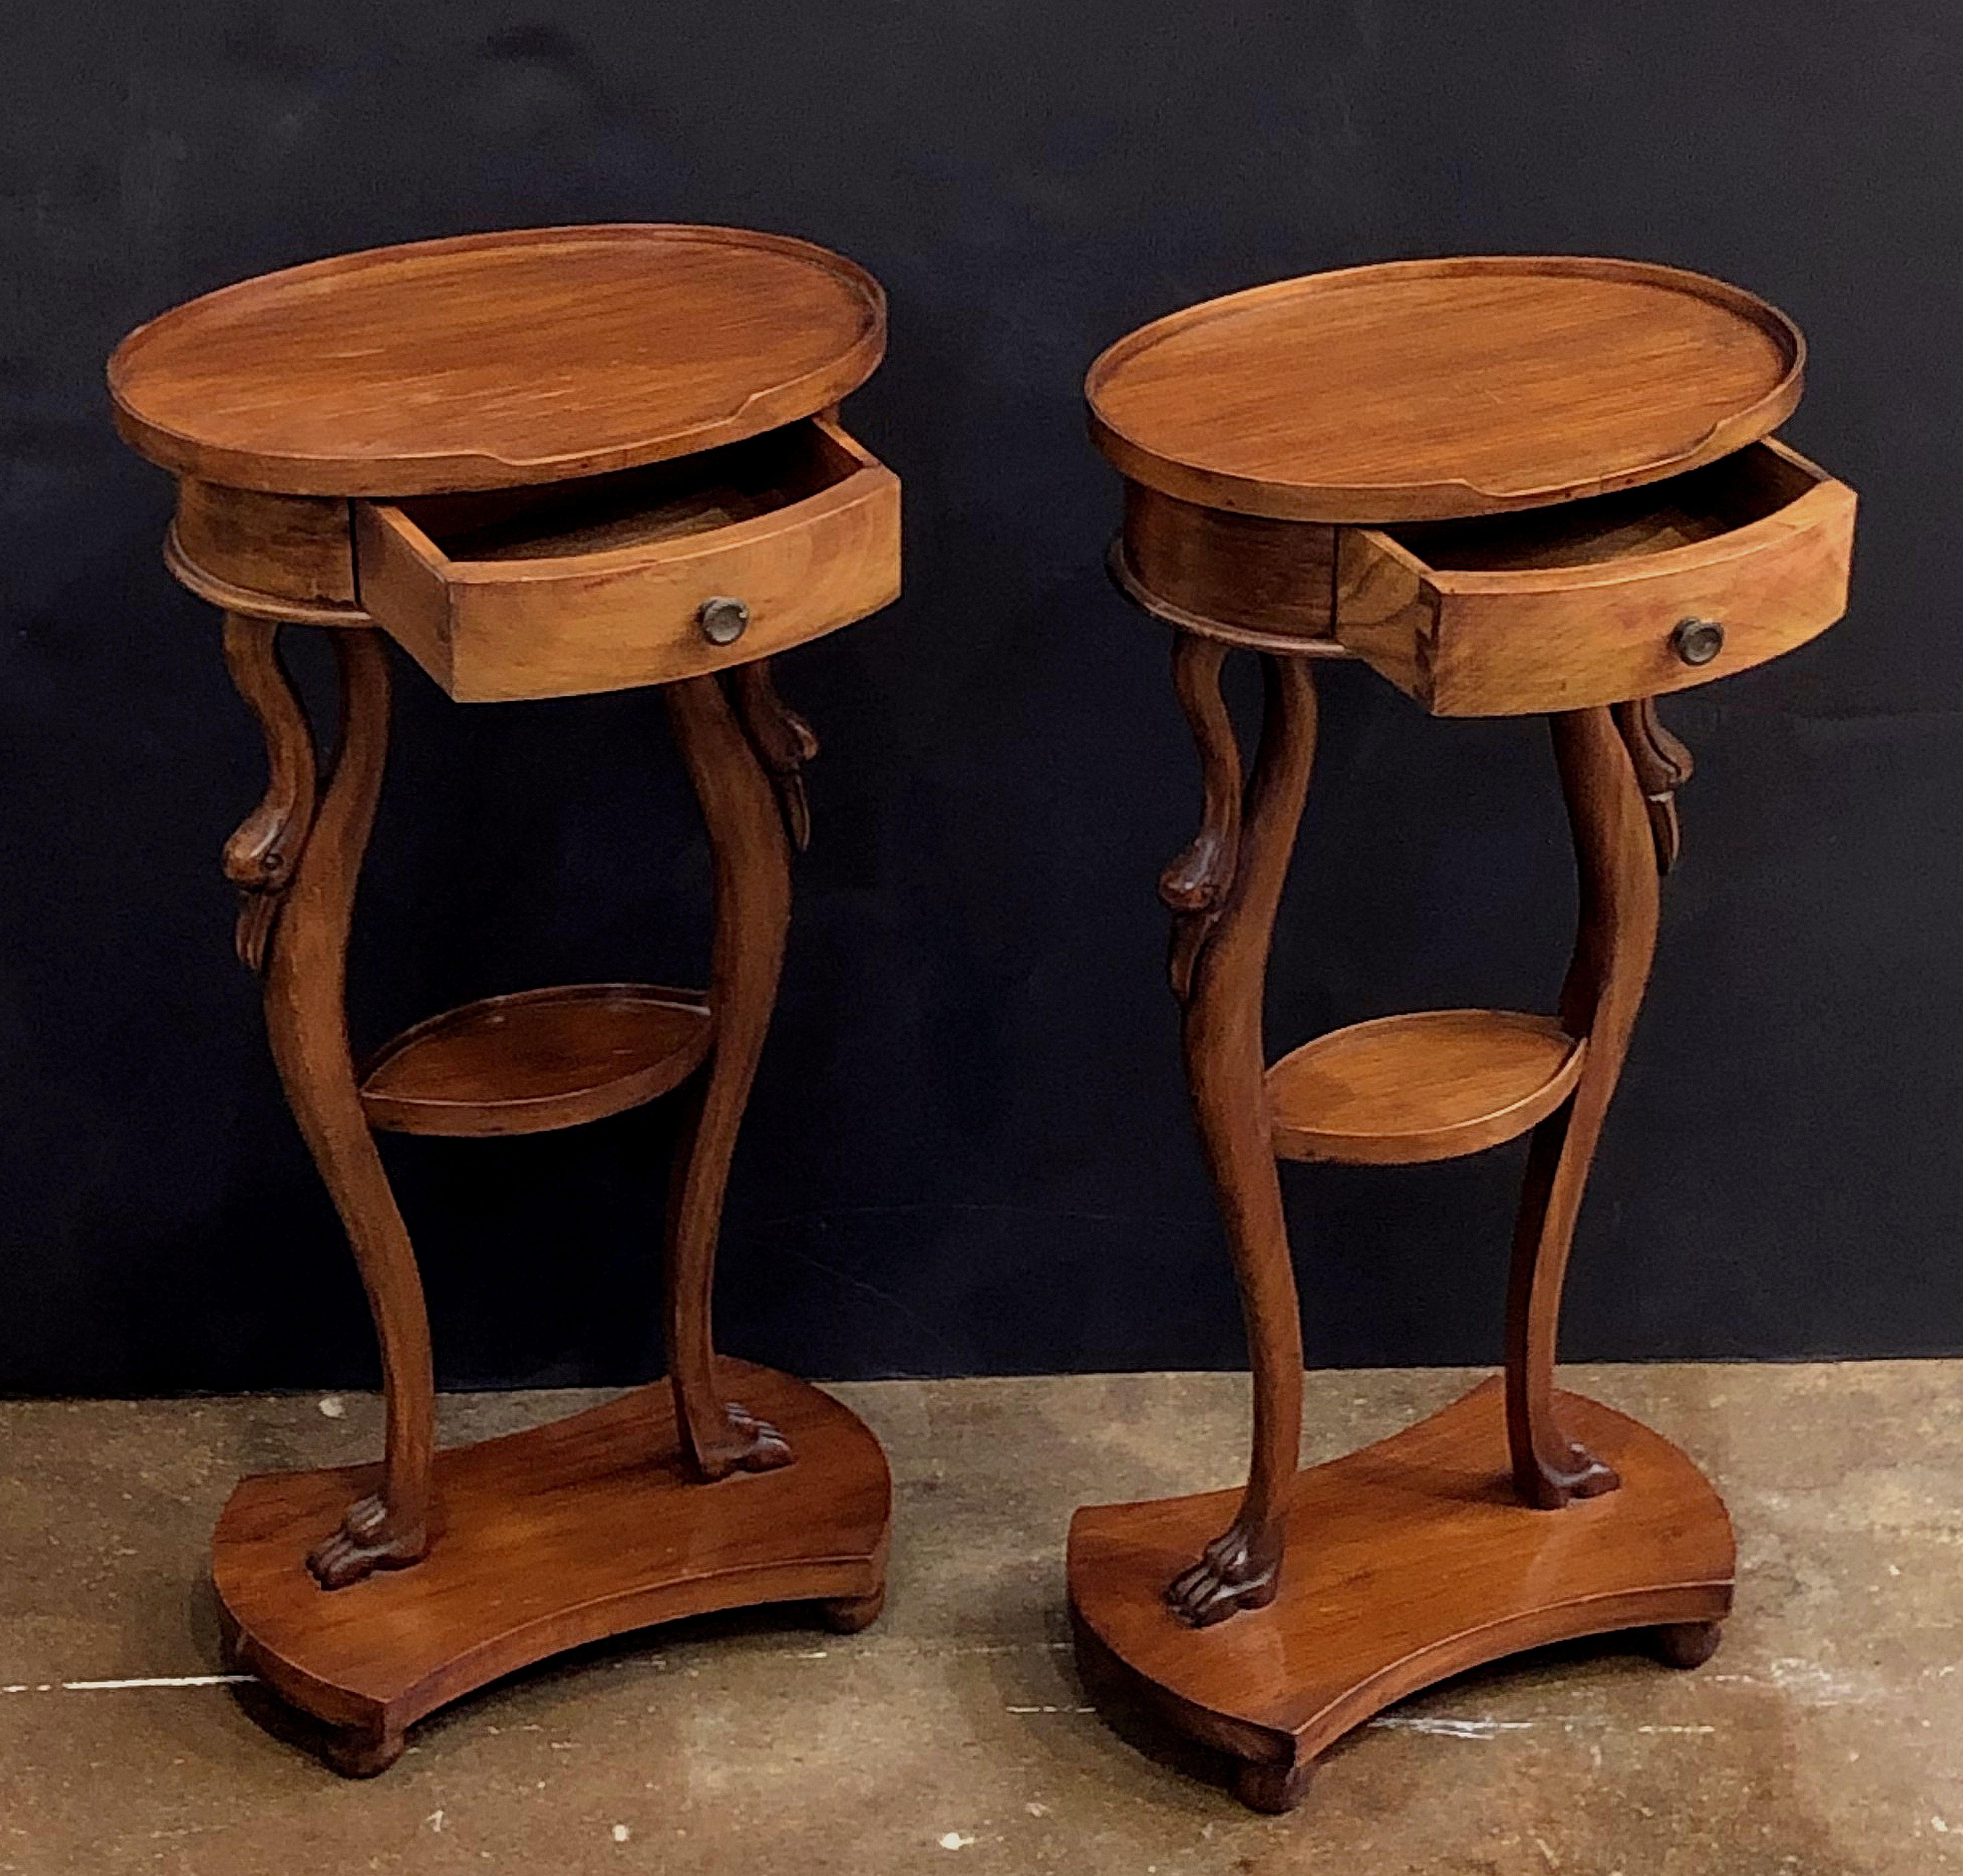 20th Century French Nightstands or Side Tables with Swan Legs 'Priced as a Pair'